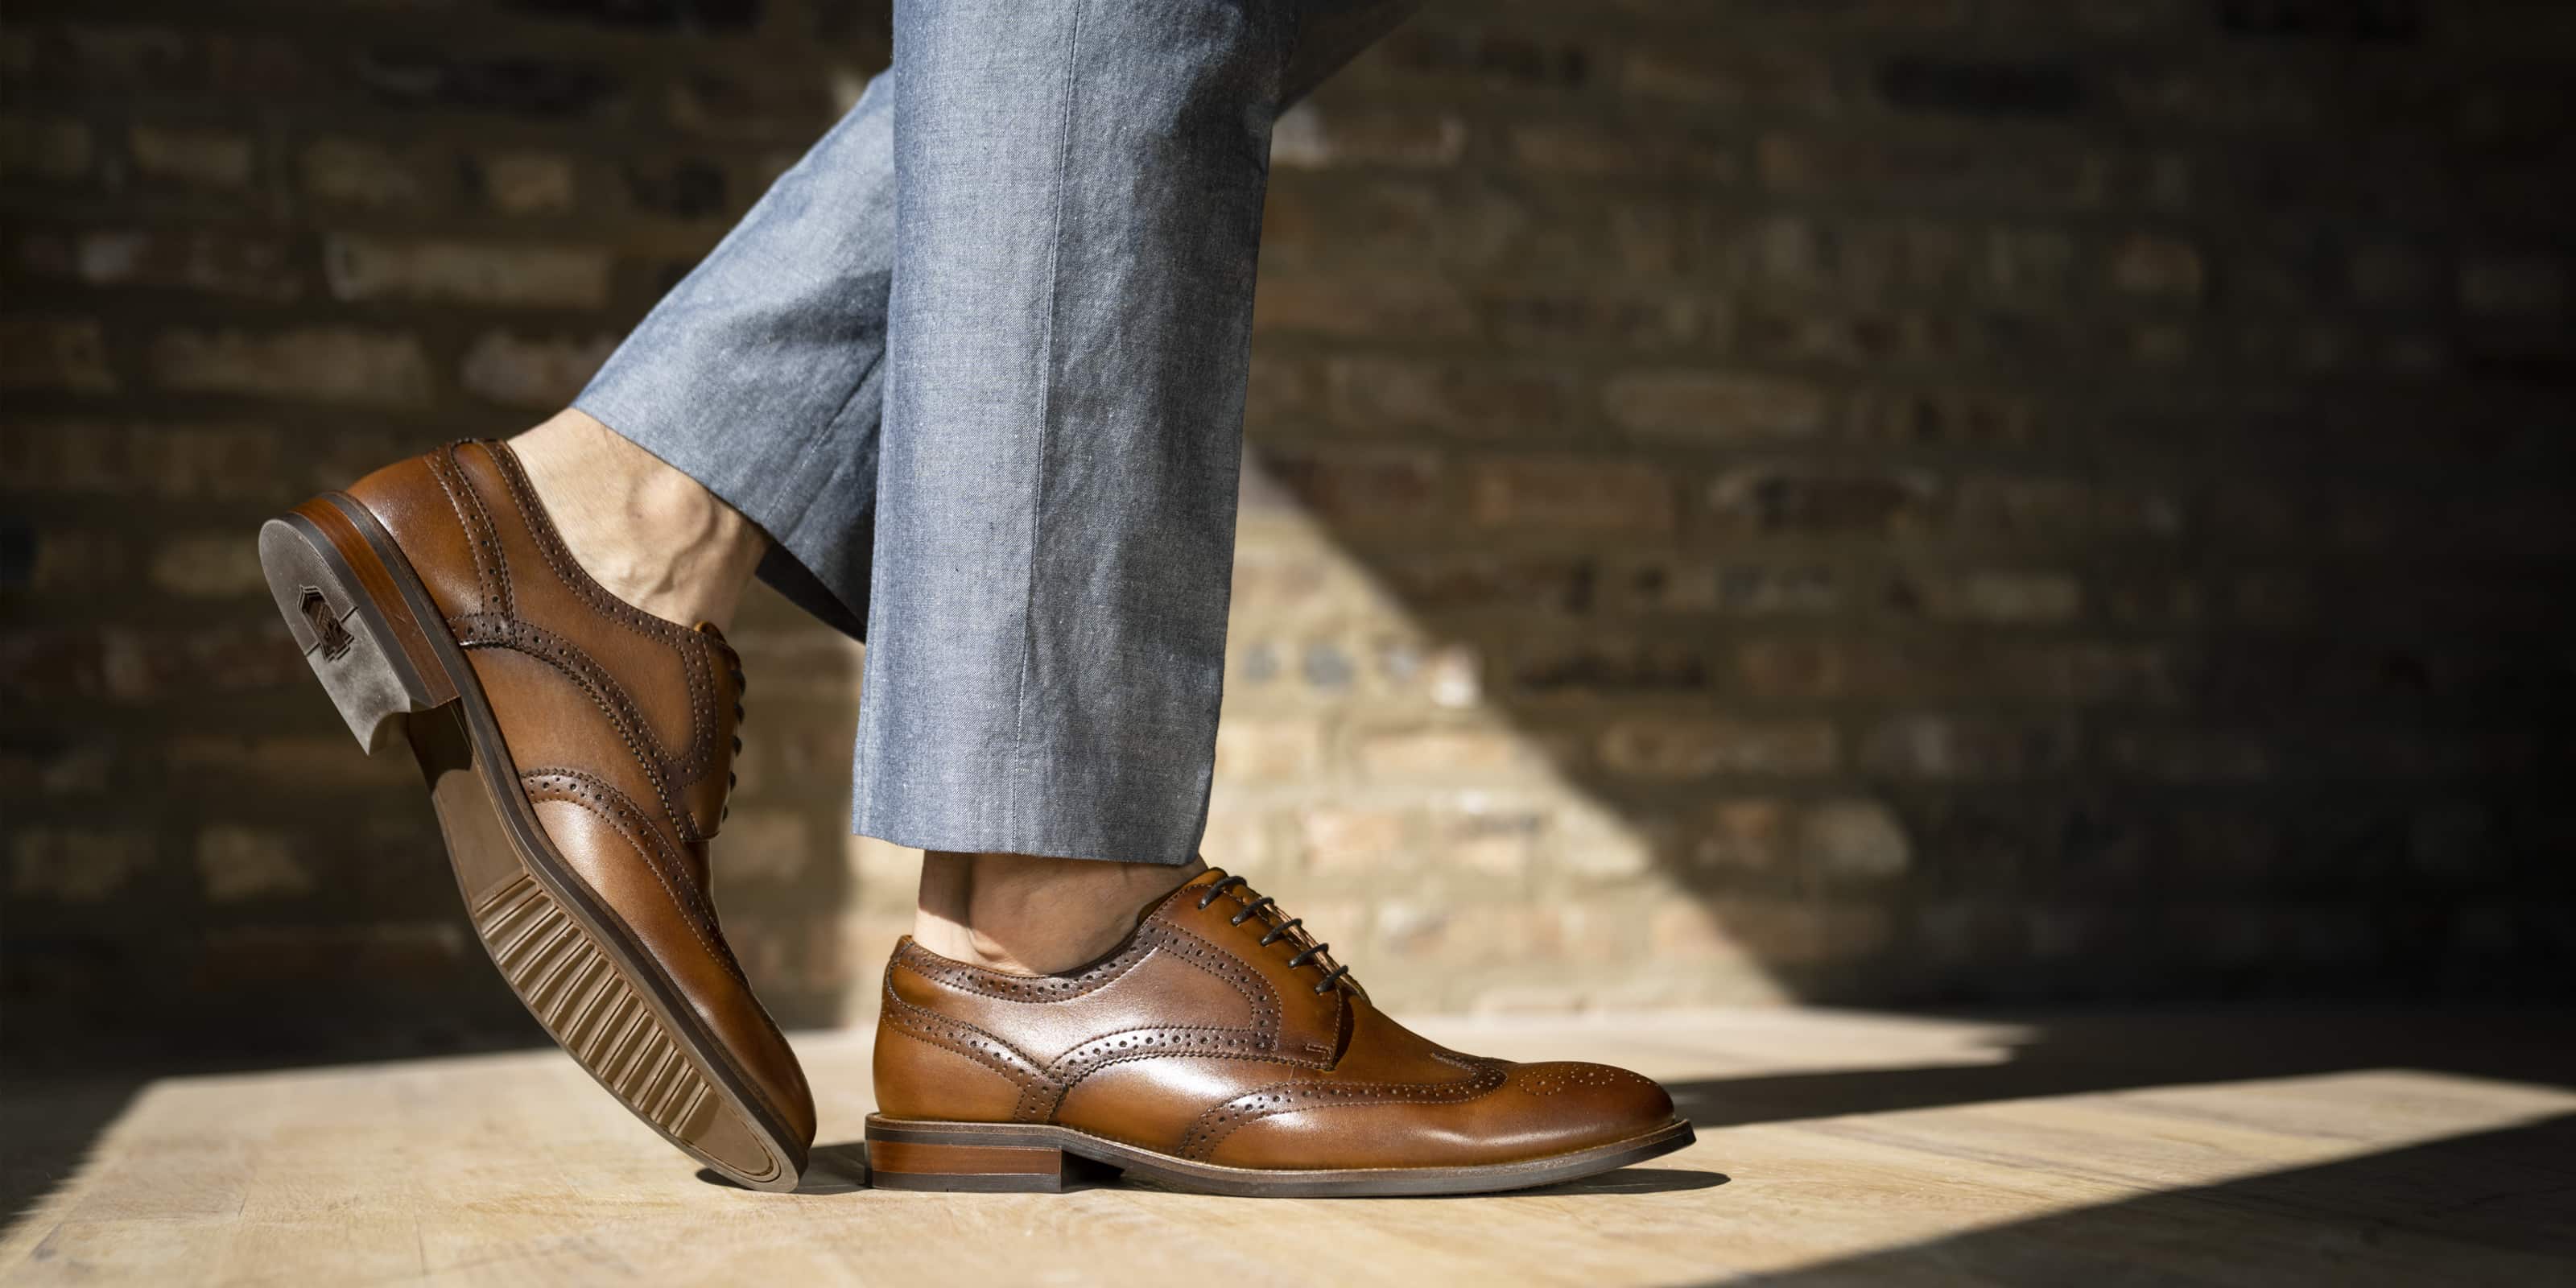 The featured image is a man wearing the Rucci Wingtip Oxford in Cognac.